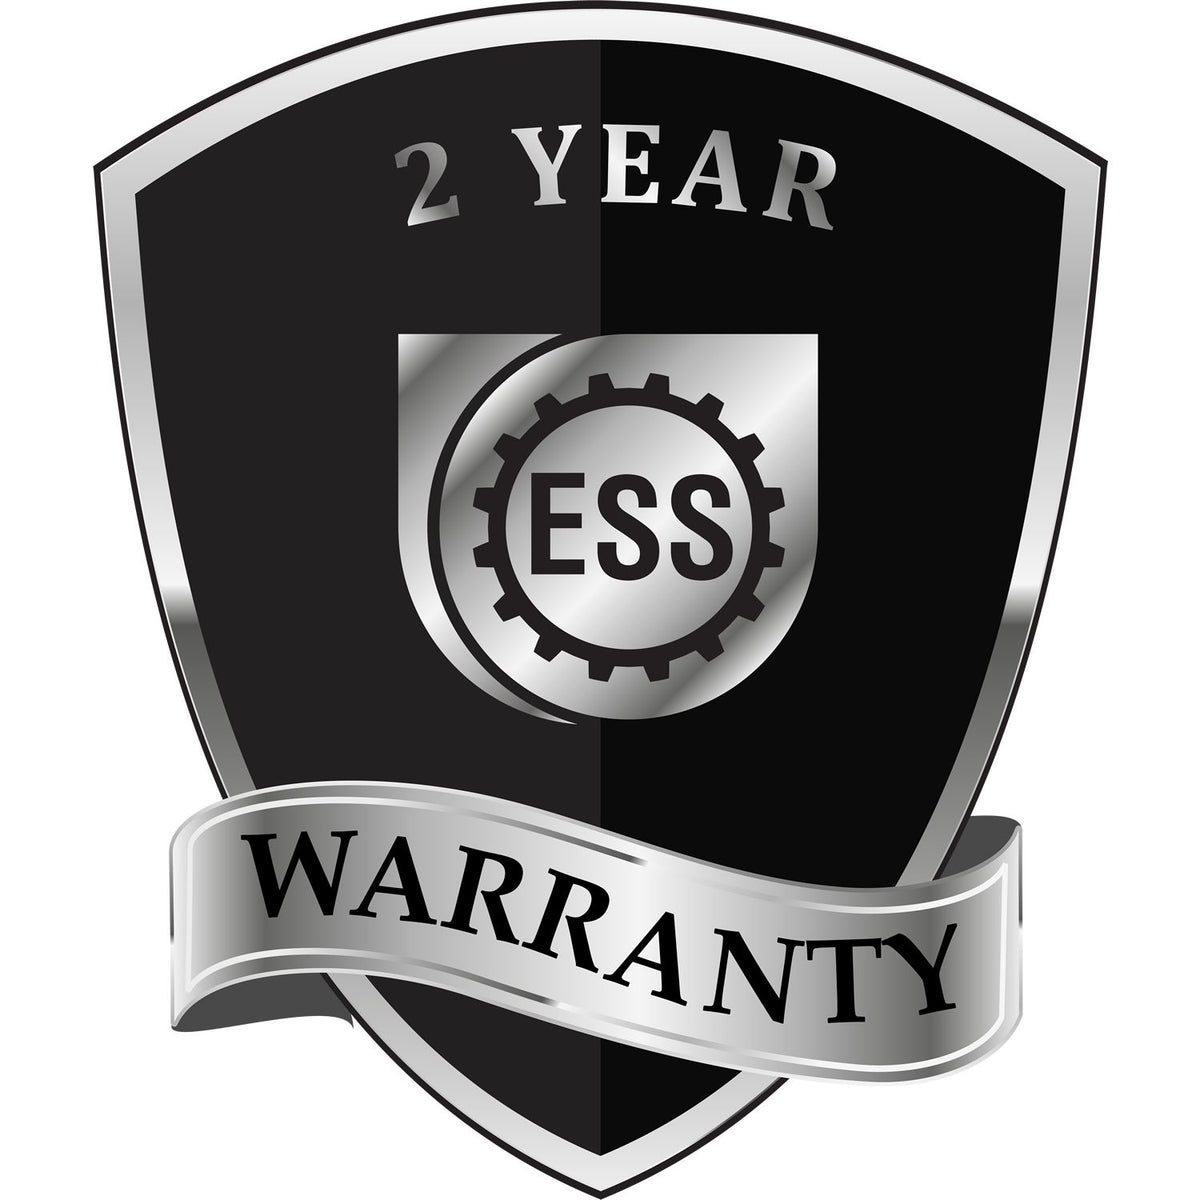 A badge or emblem showing a warranty icon for the Handheld Arizona Land Surveyor Seal